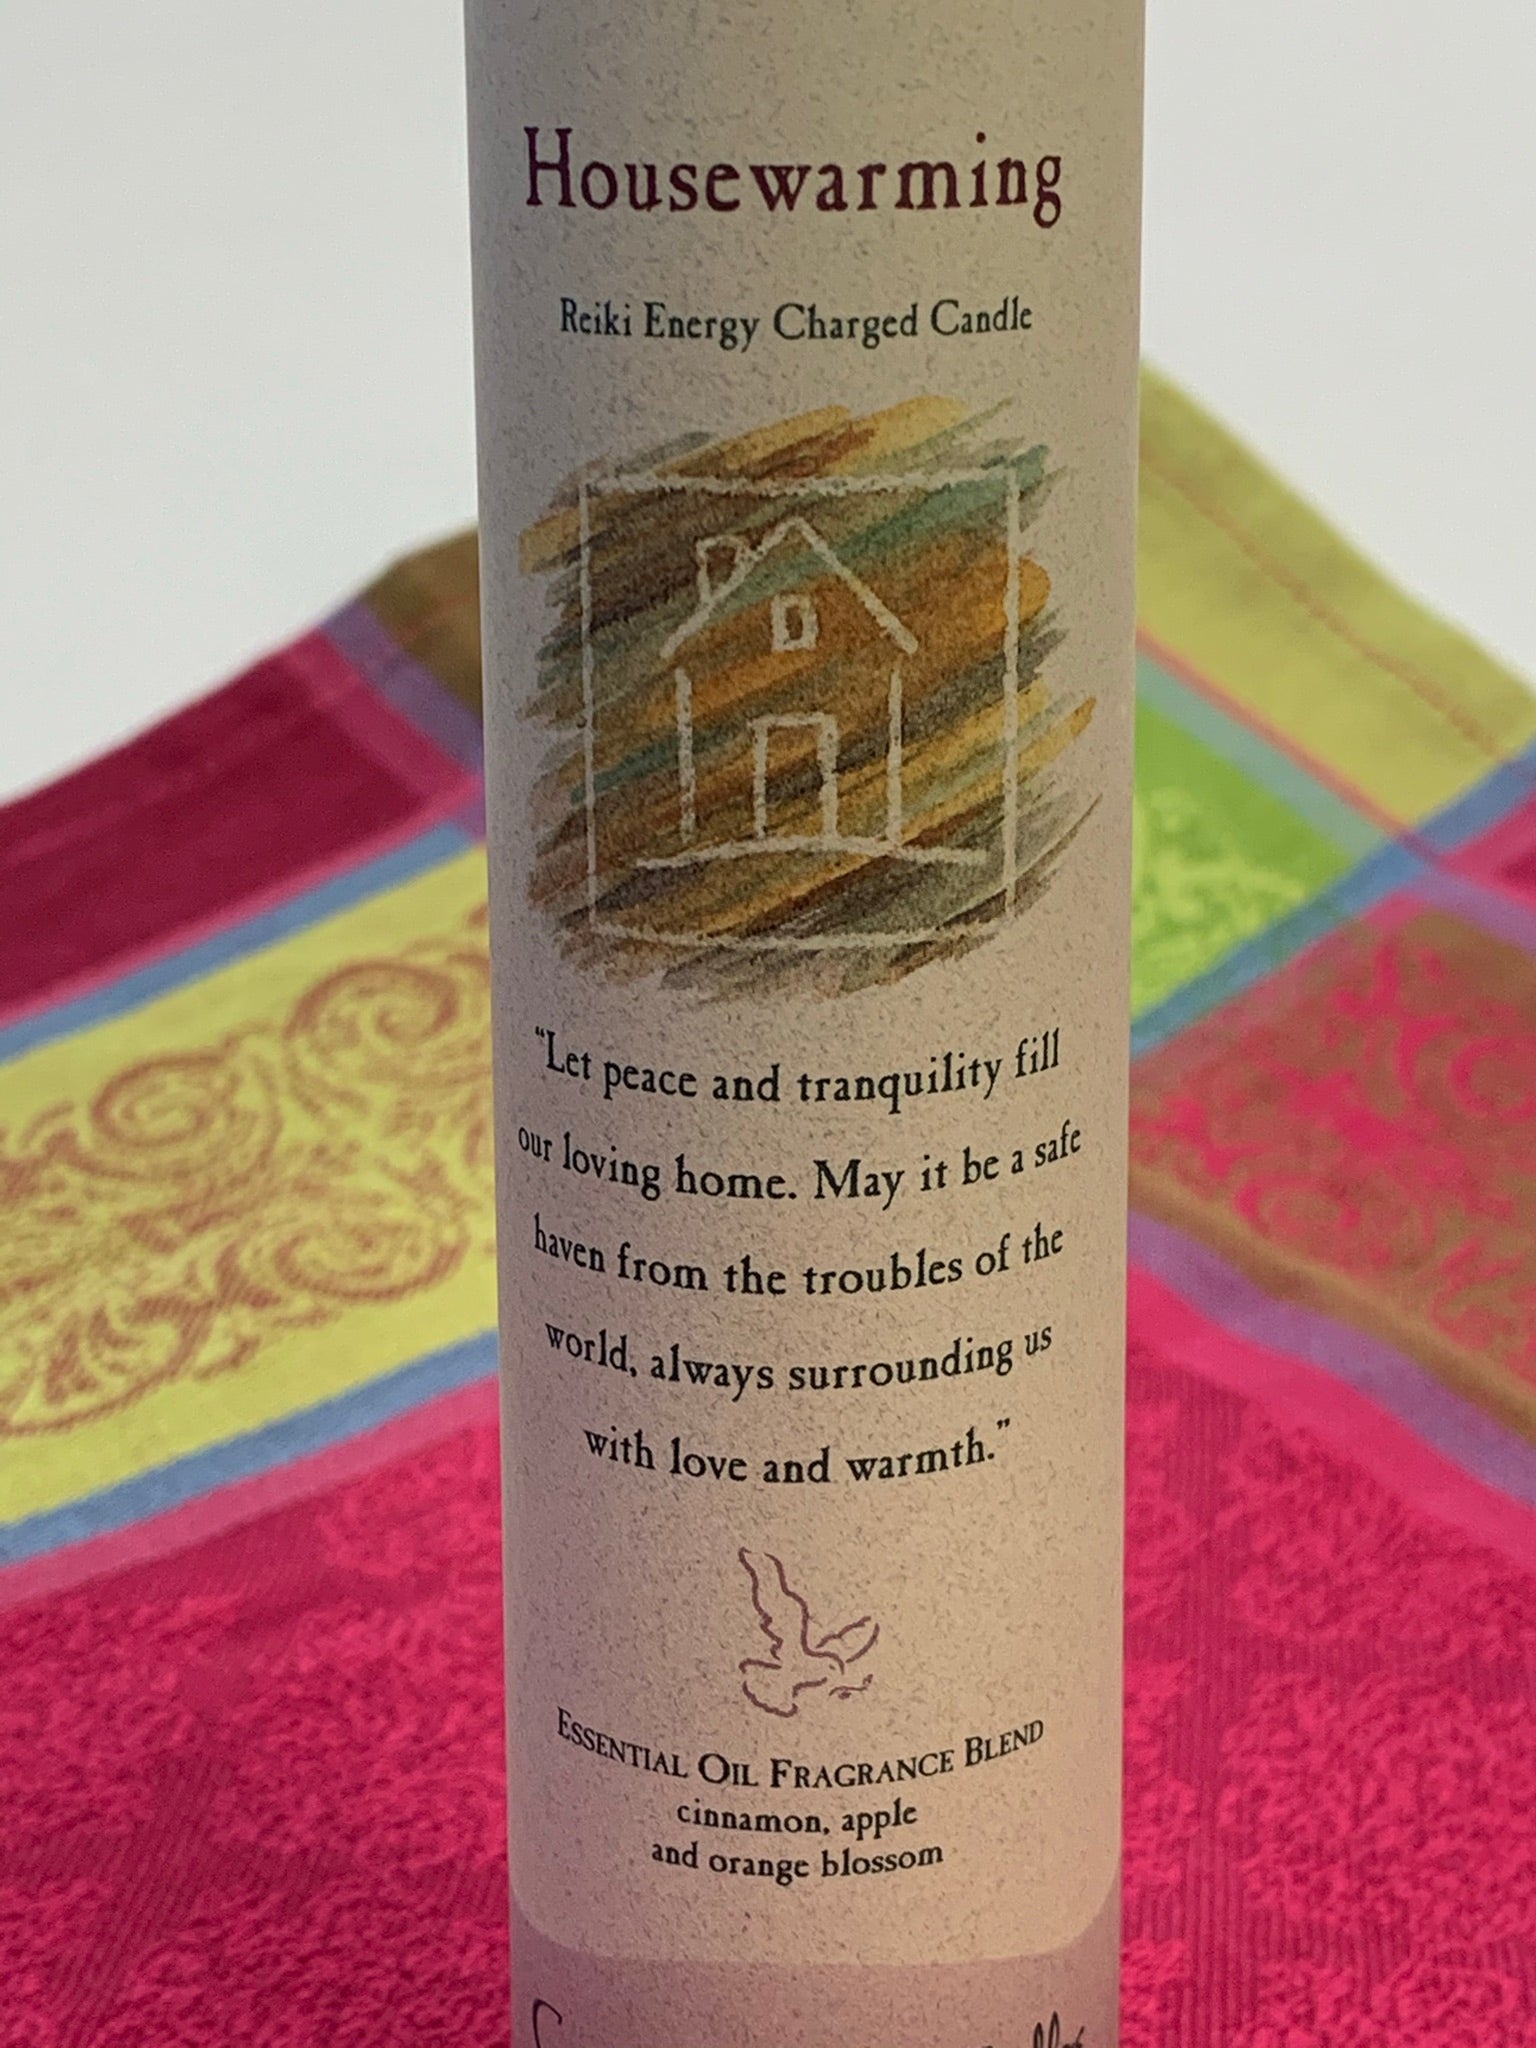 Close-up view of the Reiki-charged pillar candle for "Housewarming" energy - bringing love, peace and warmth to any home. It is handcrafted and scented using essential oils. An affirmation/prayer is printed on the label, a well as a listing of the essential oils used (cinnamon, apple and orange blossom). It is approximately 7"x2½". Perfect for meditation, visualization or quiet time. This mahogany brown candle and its label are both visually appealing.